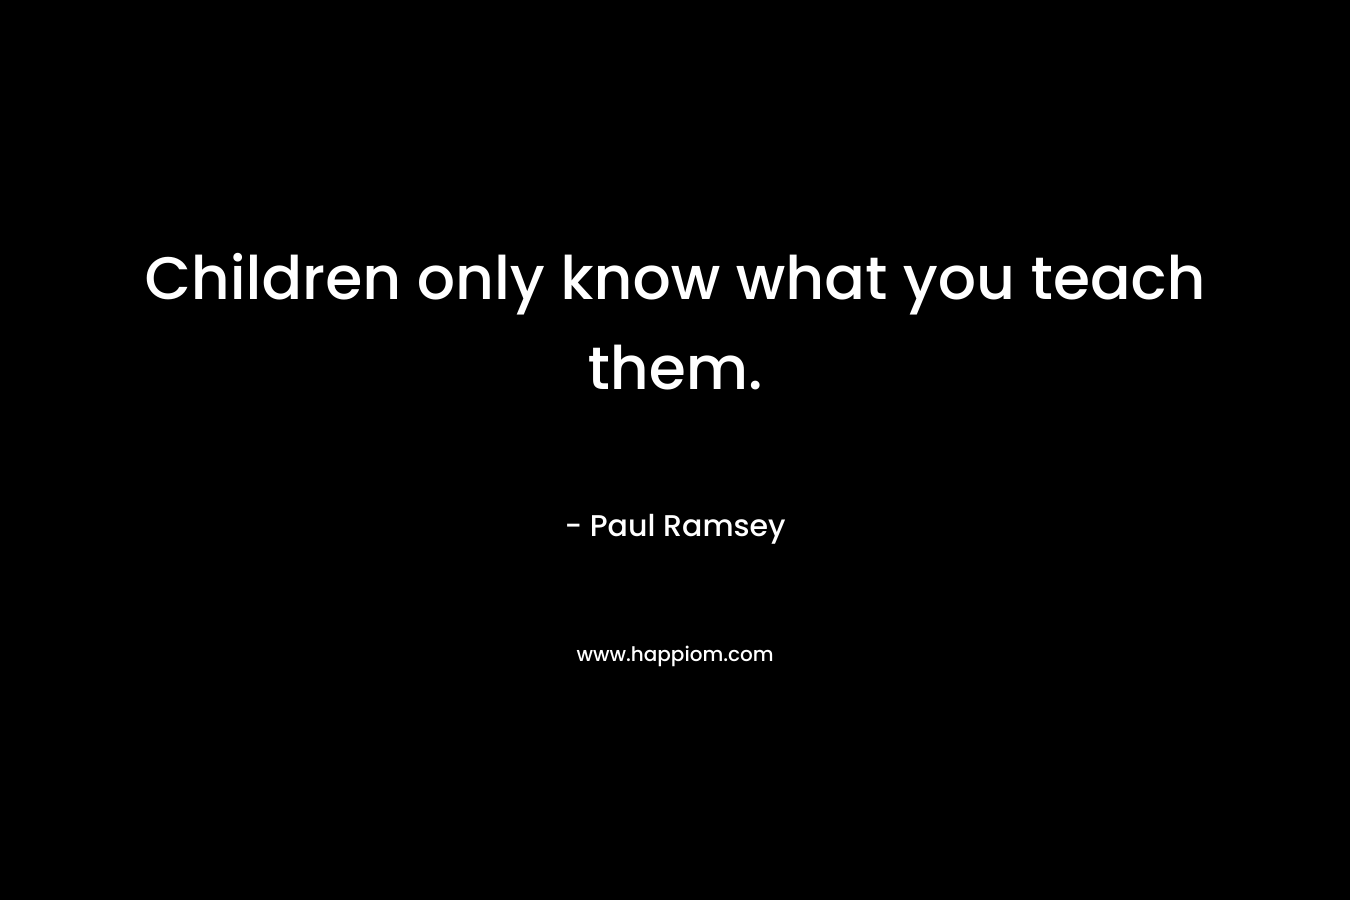 Children only know what you teach them.